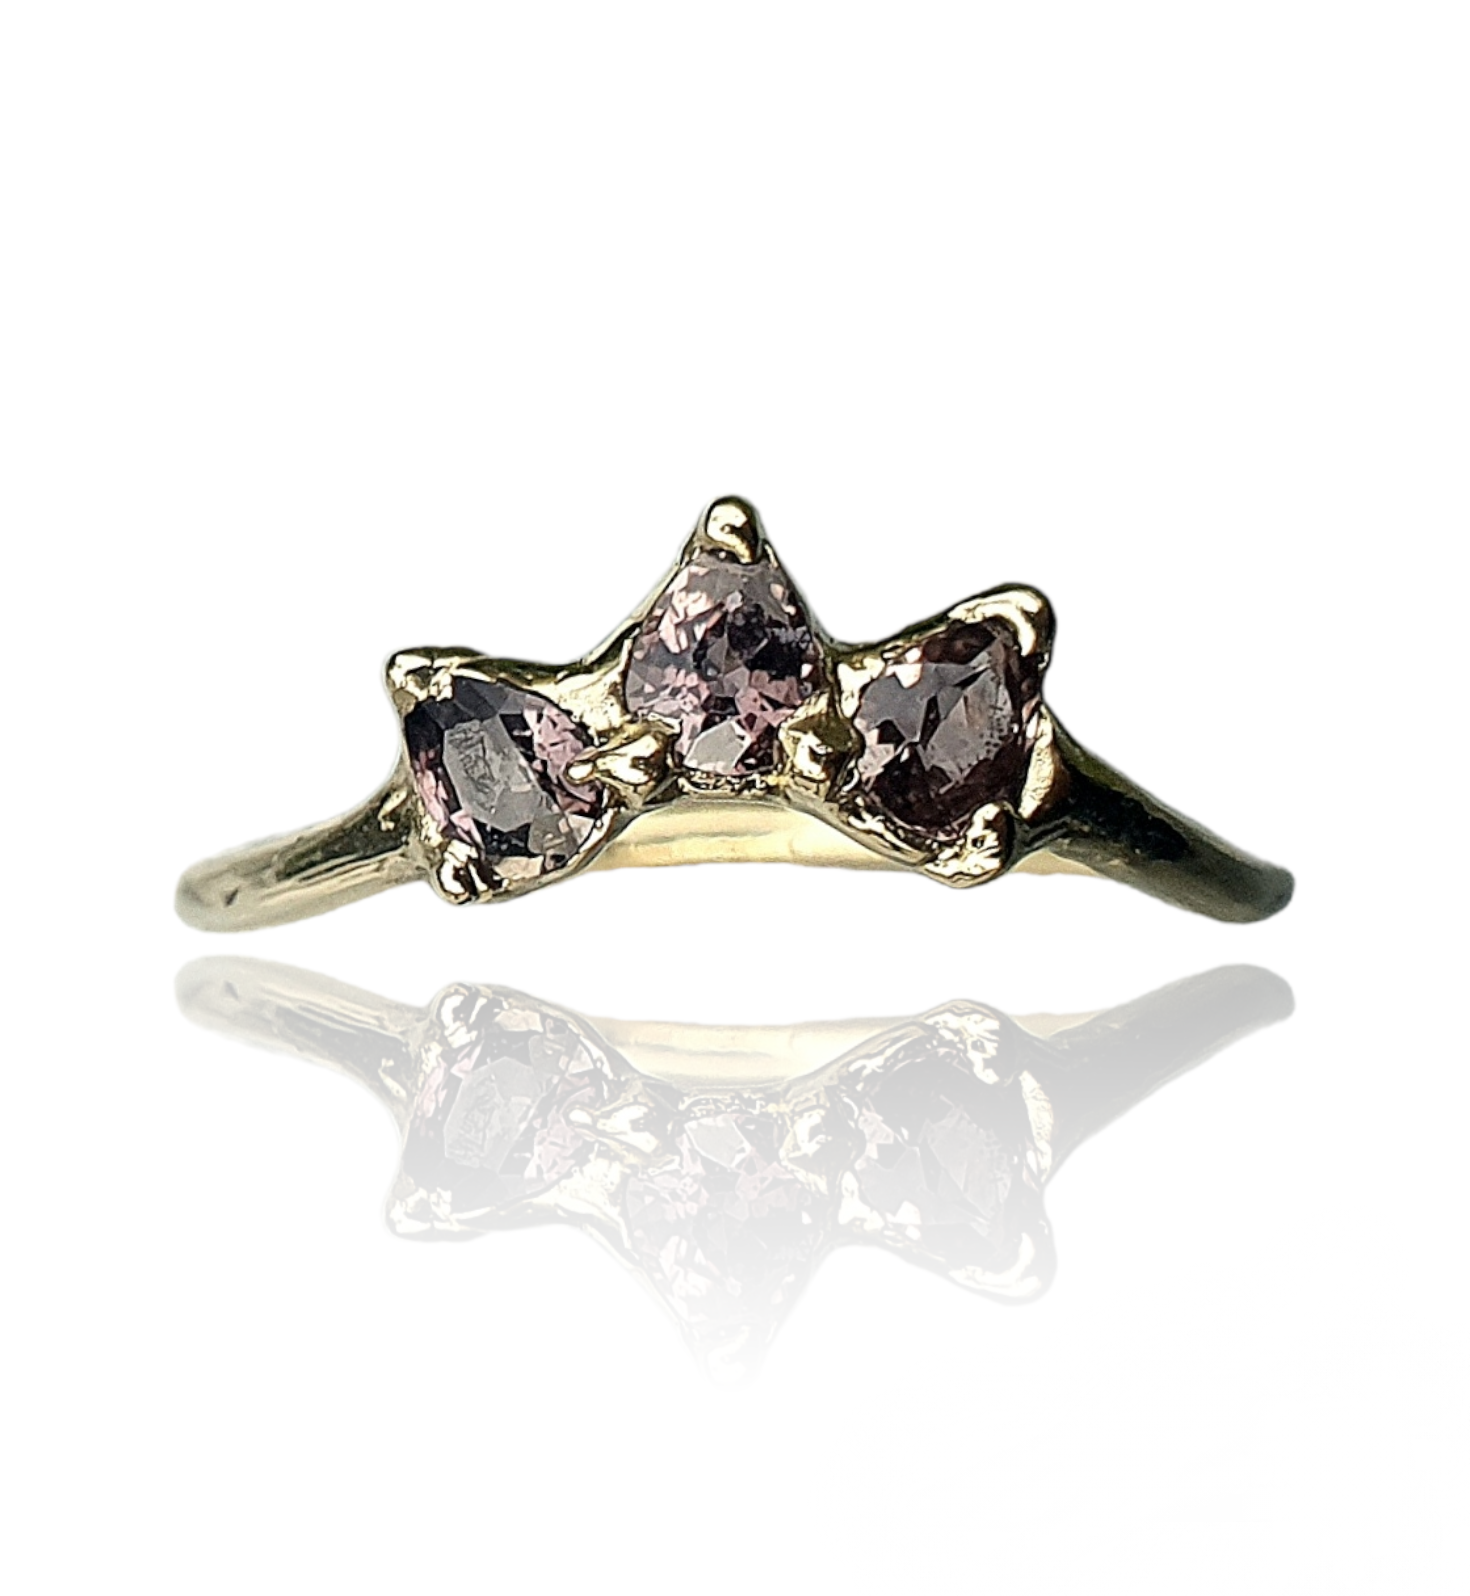 Estella Crown Ring - 9k gold and sapphire crown ring